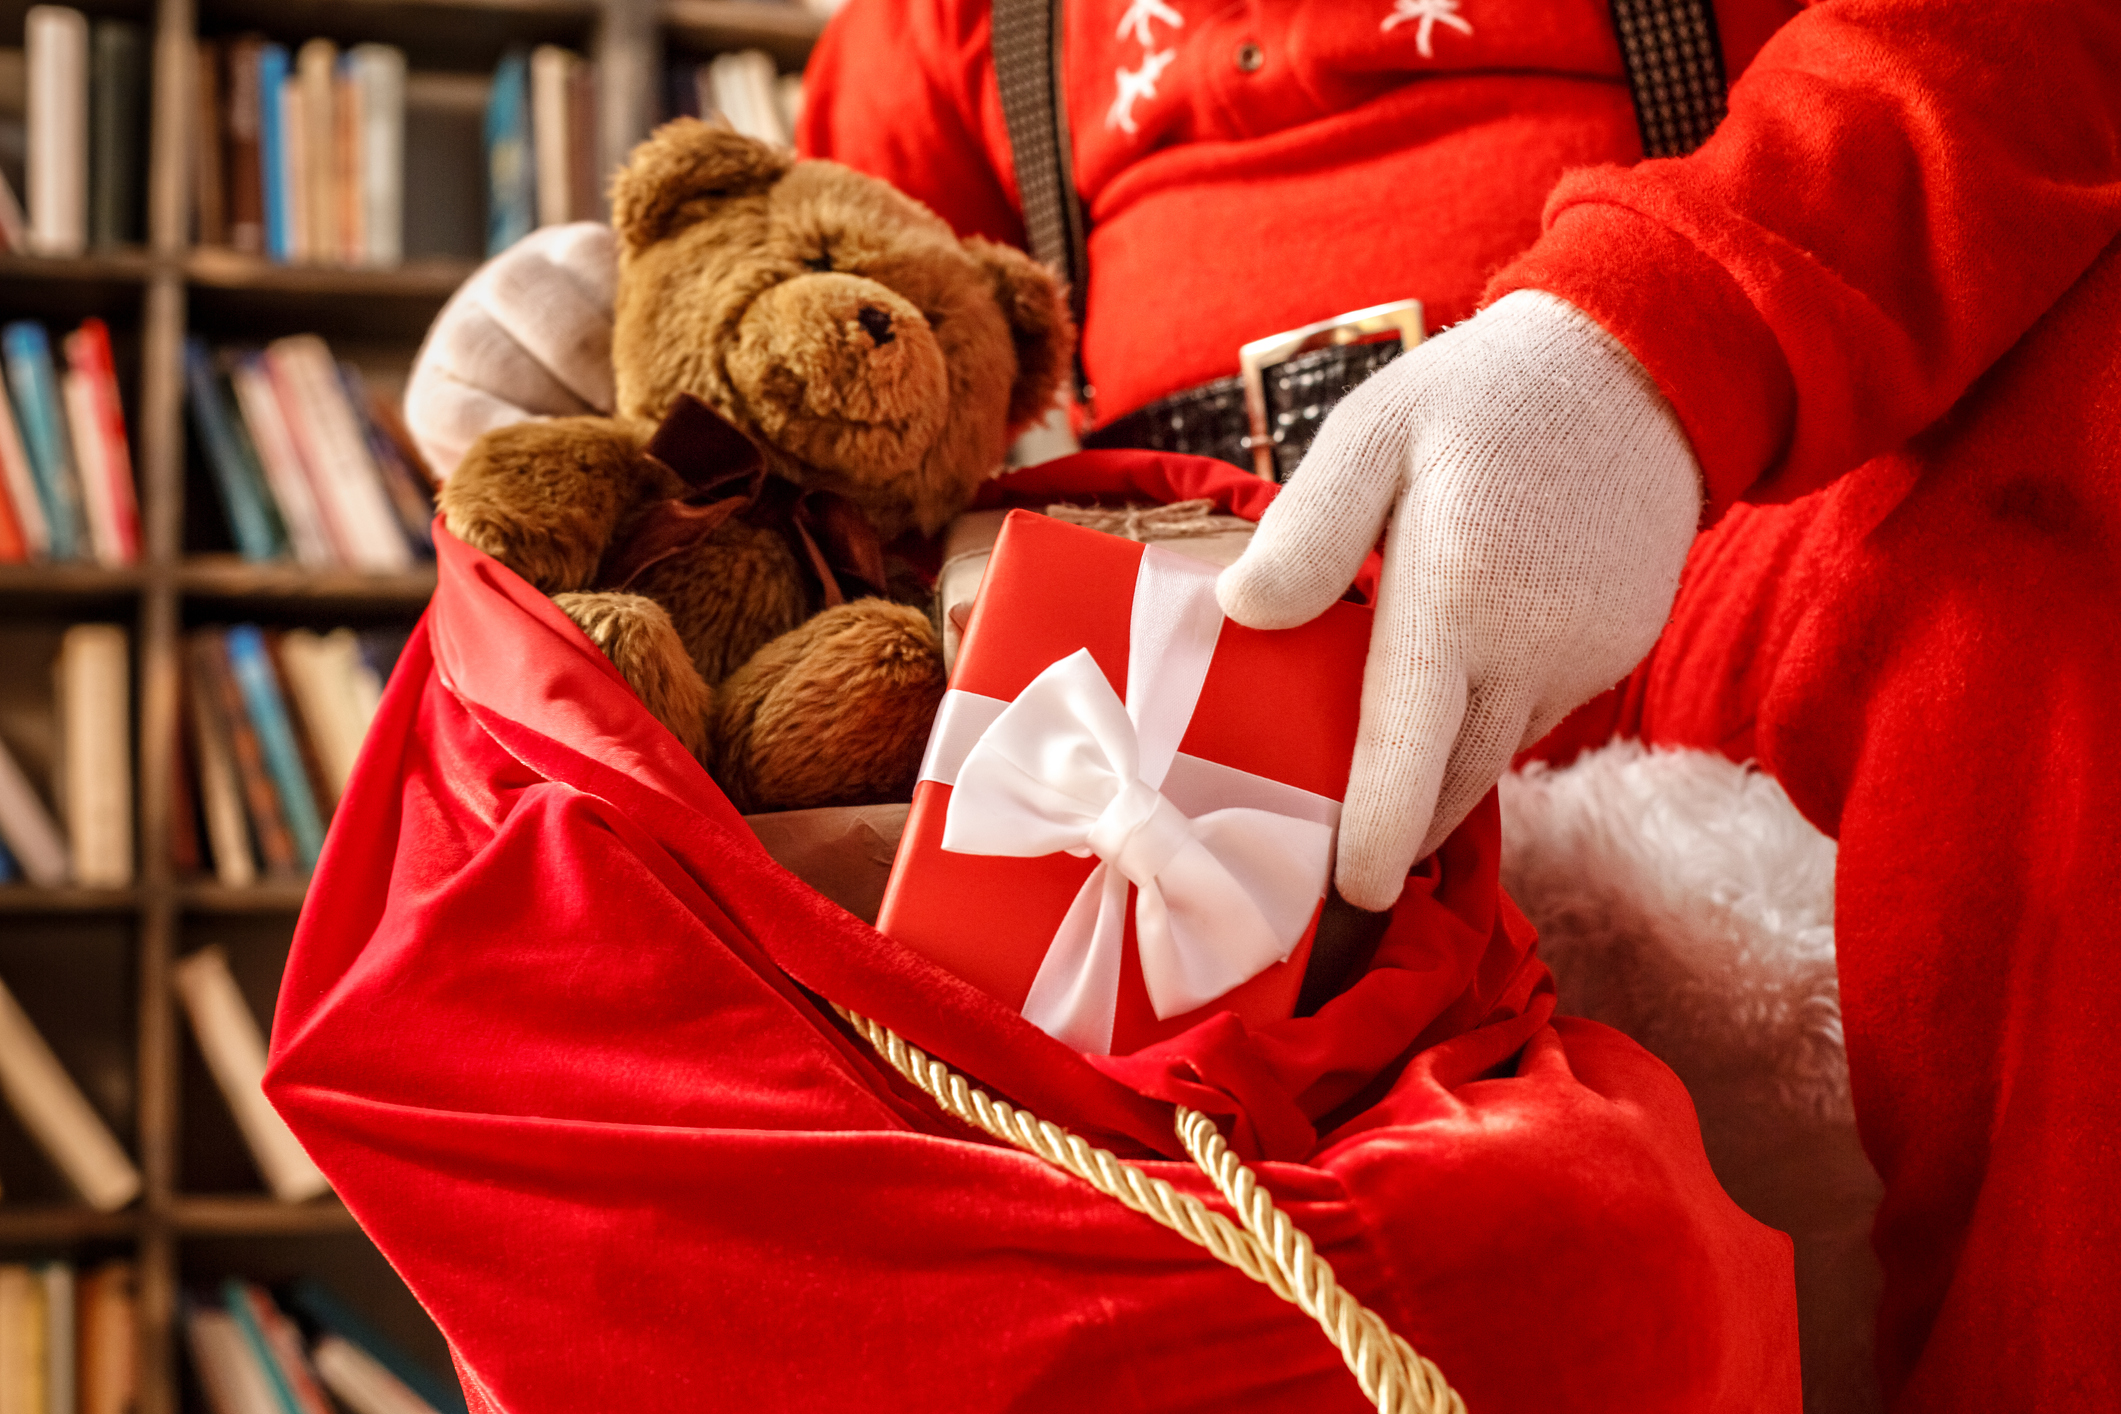 Santa has lots of fun surprises for Palm Beach kids this month